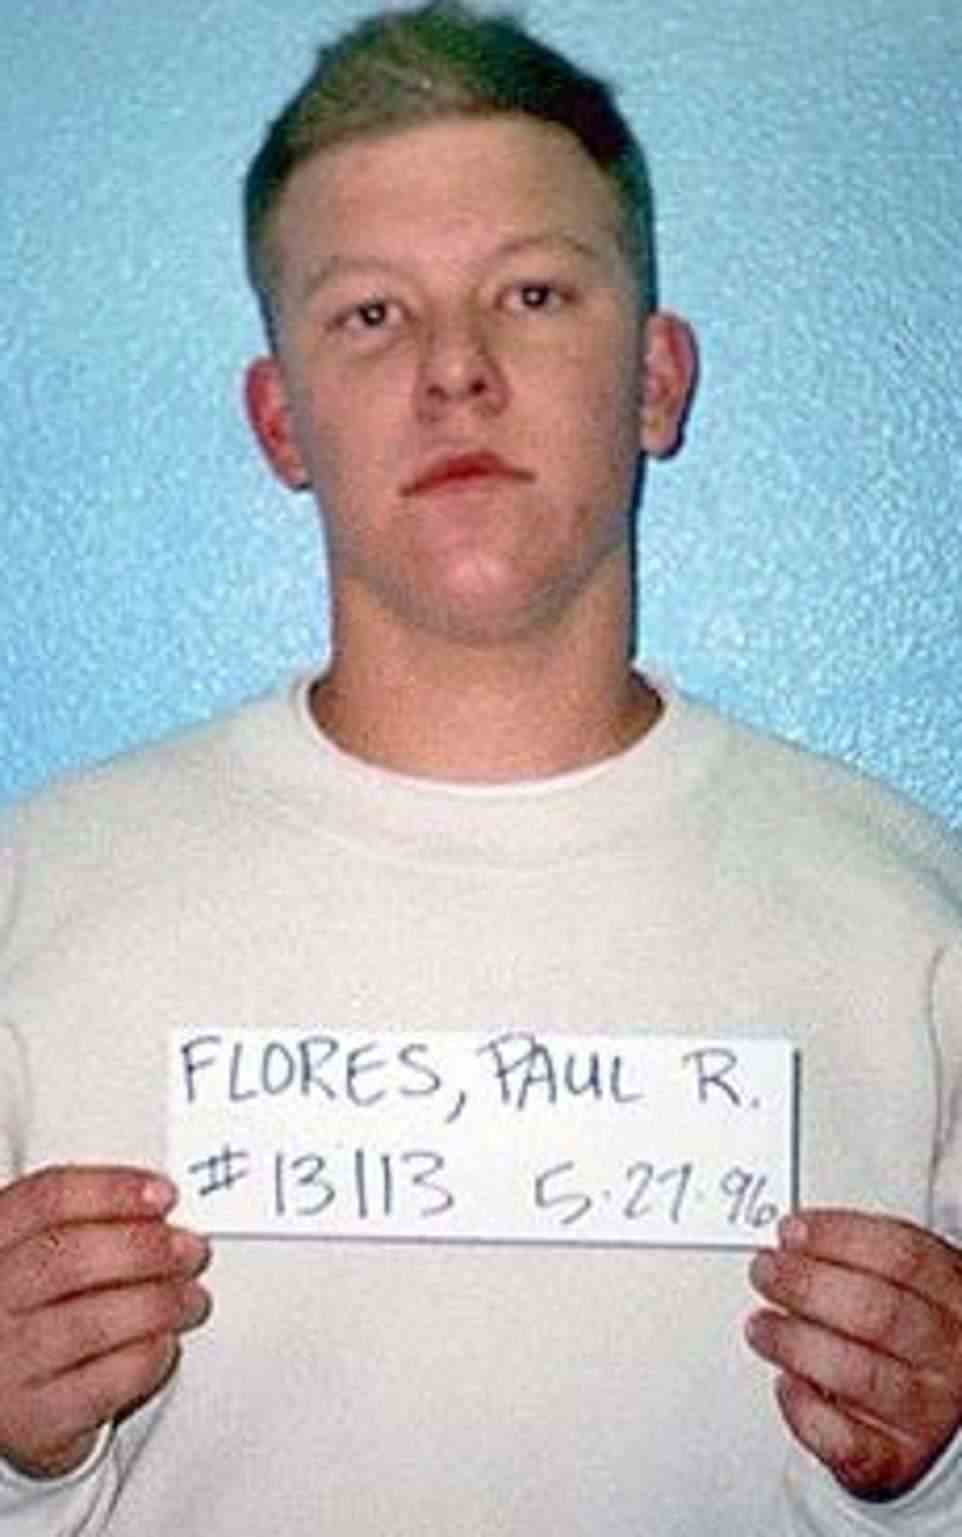 However, authorities were never able to make an arrest due to lack of evidence - and for more than two decades, the case sat cold. Flores is seen in 1996